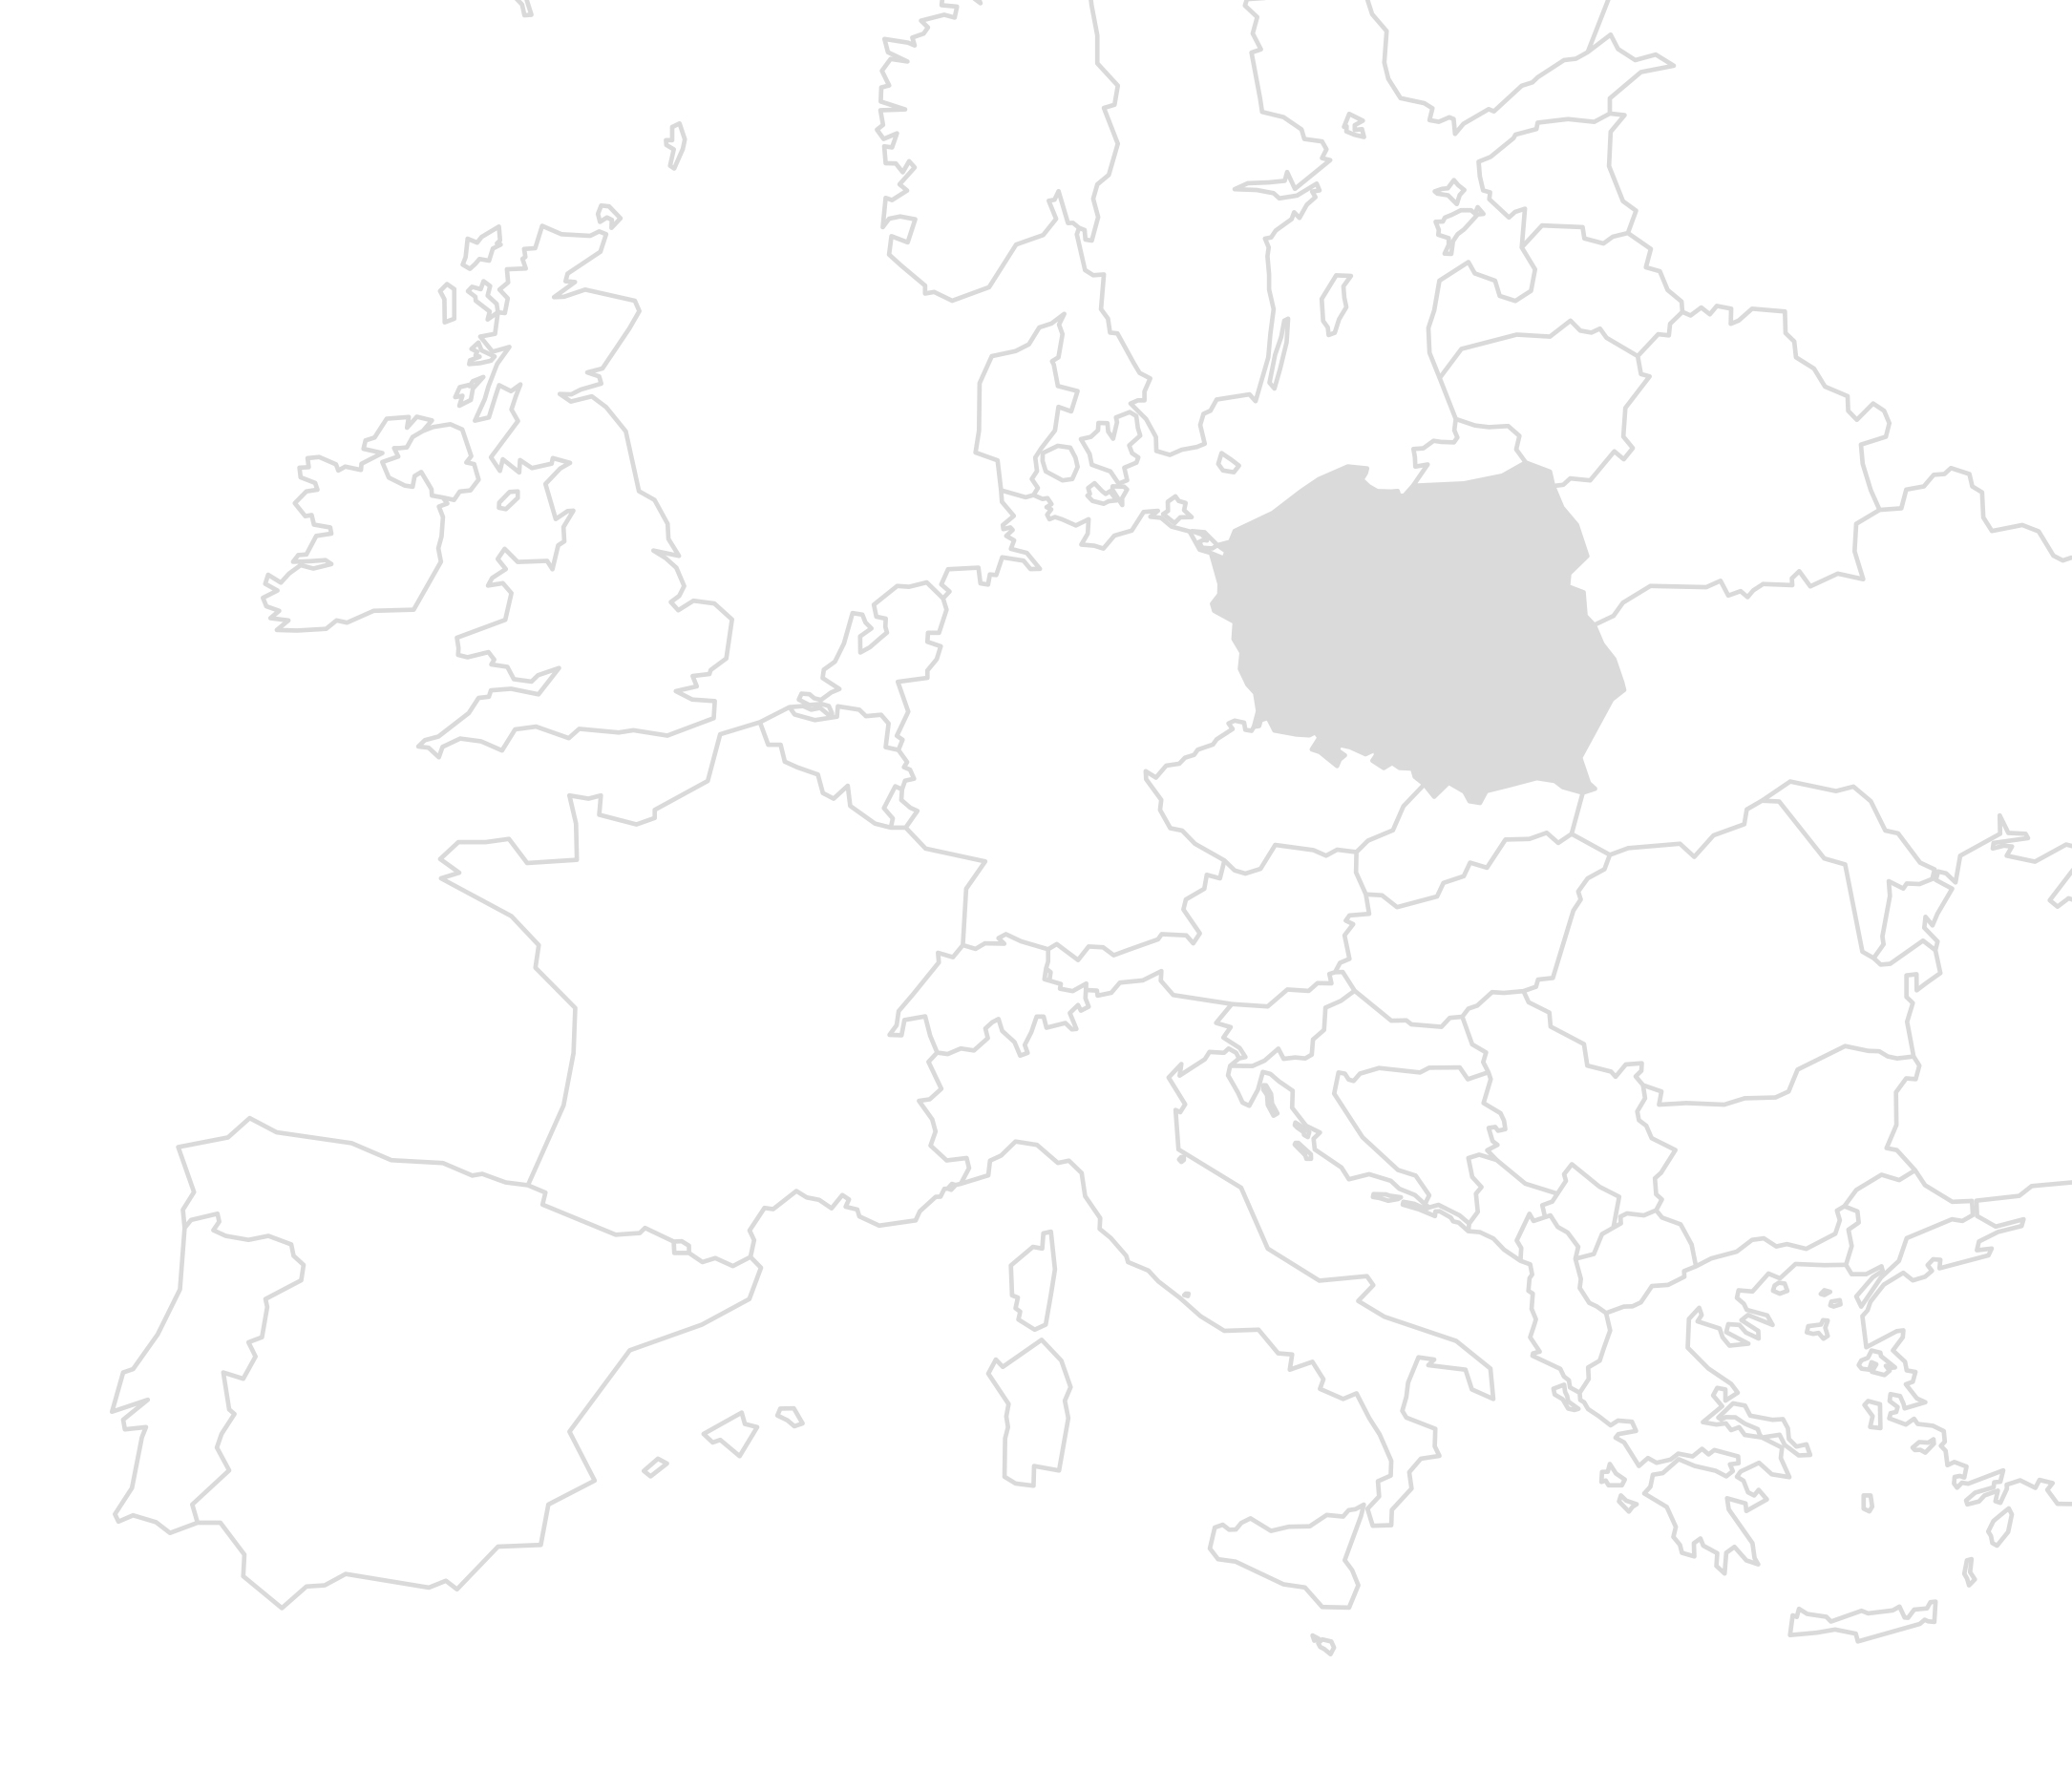 A map of Europe where Poland is filled in gray to visualize the location of the construction project.